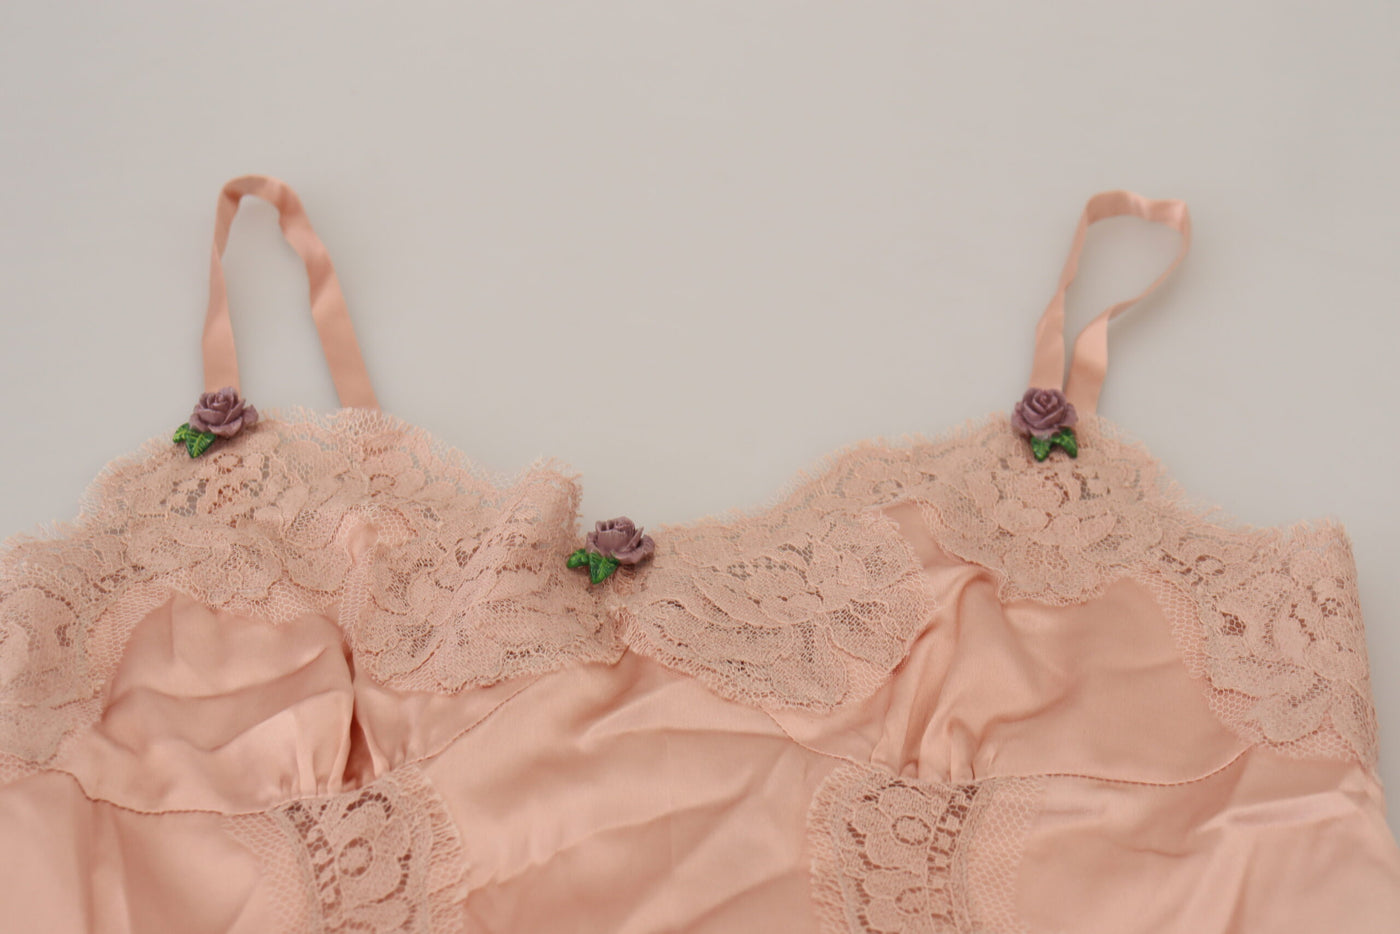 Pink Satin Lace Roses Tank Top Lingerie